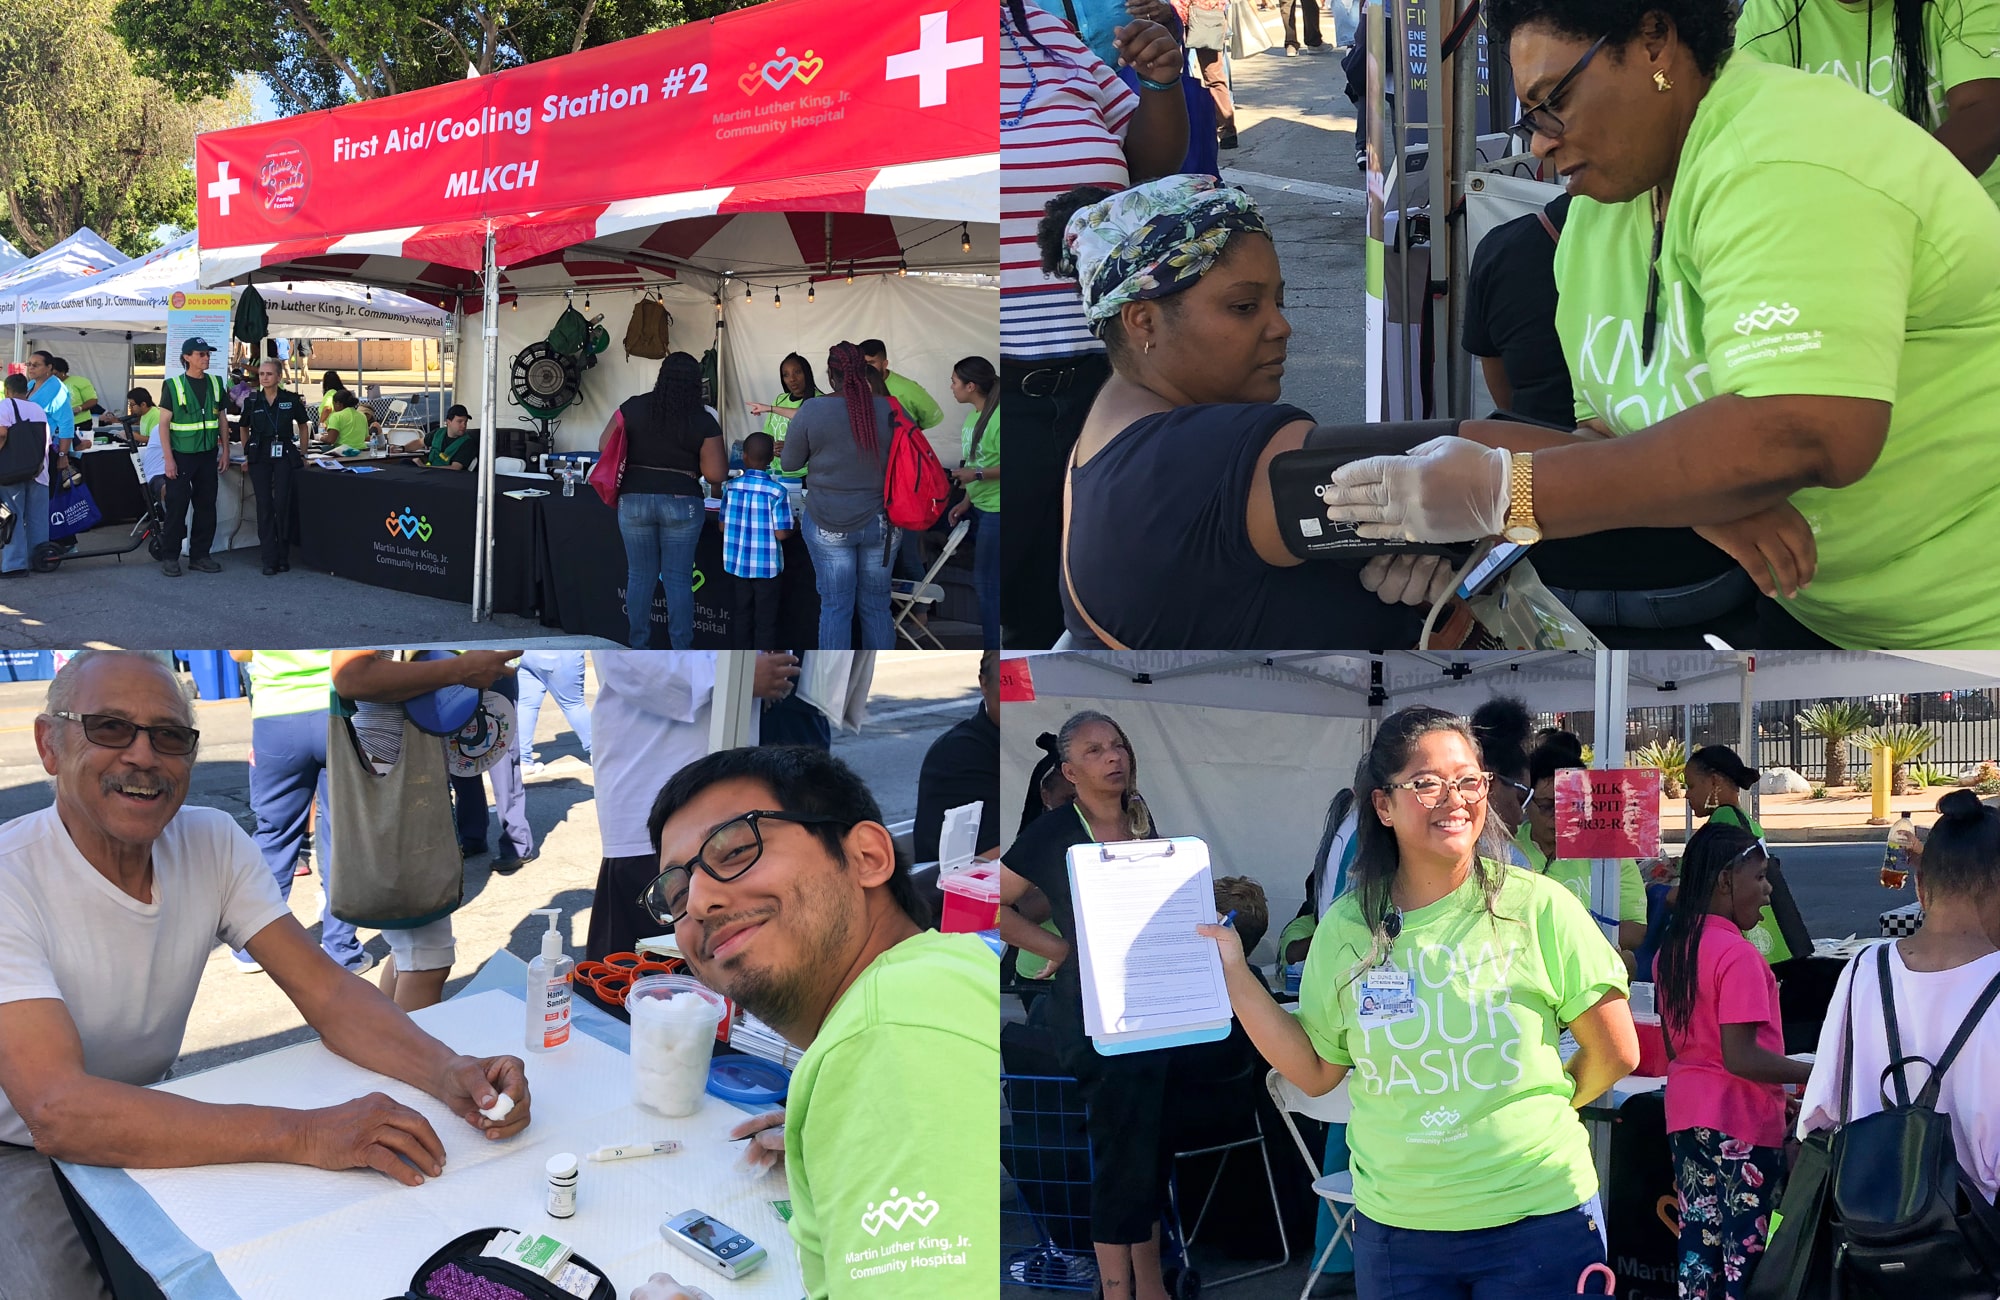 Collage of a health screening event with images of health workers taking blood pressure, smiling patients, the event tent